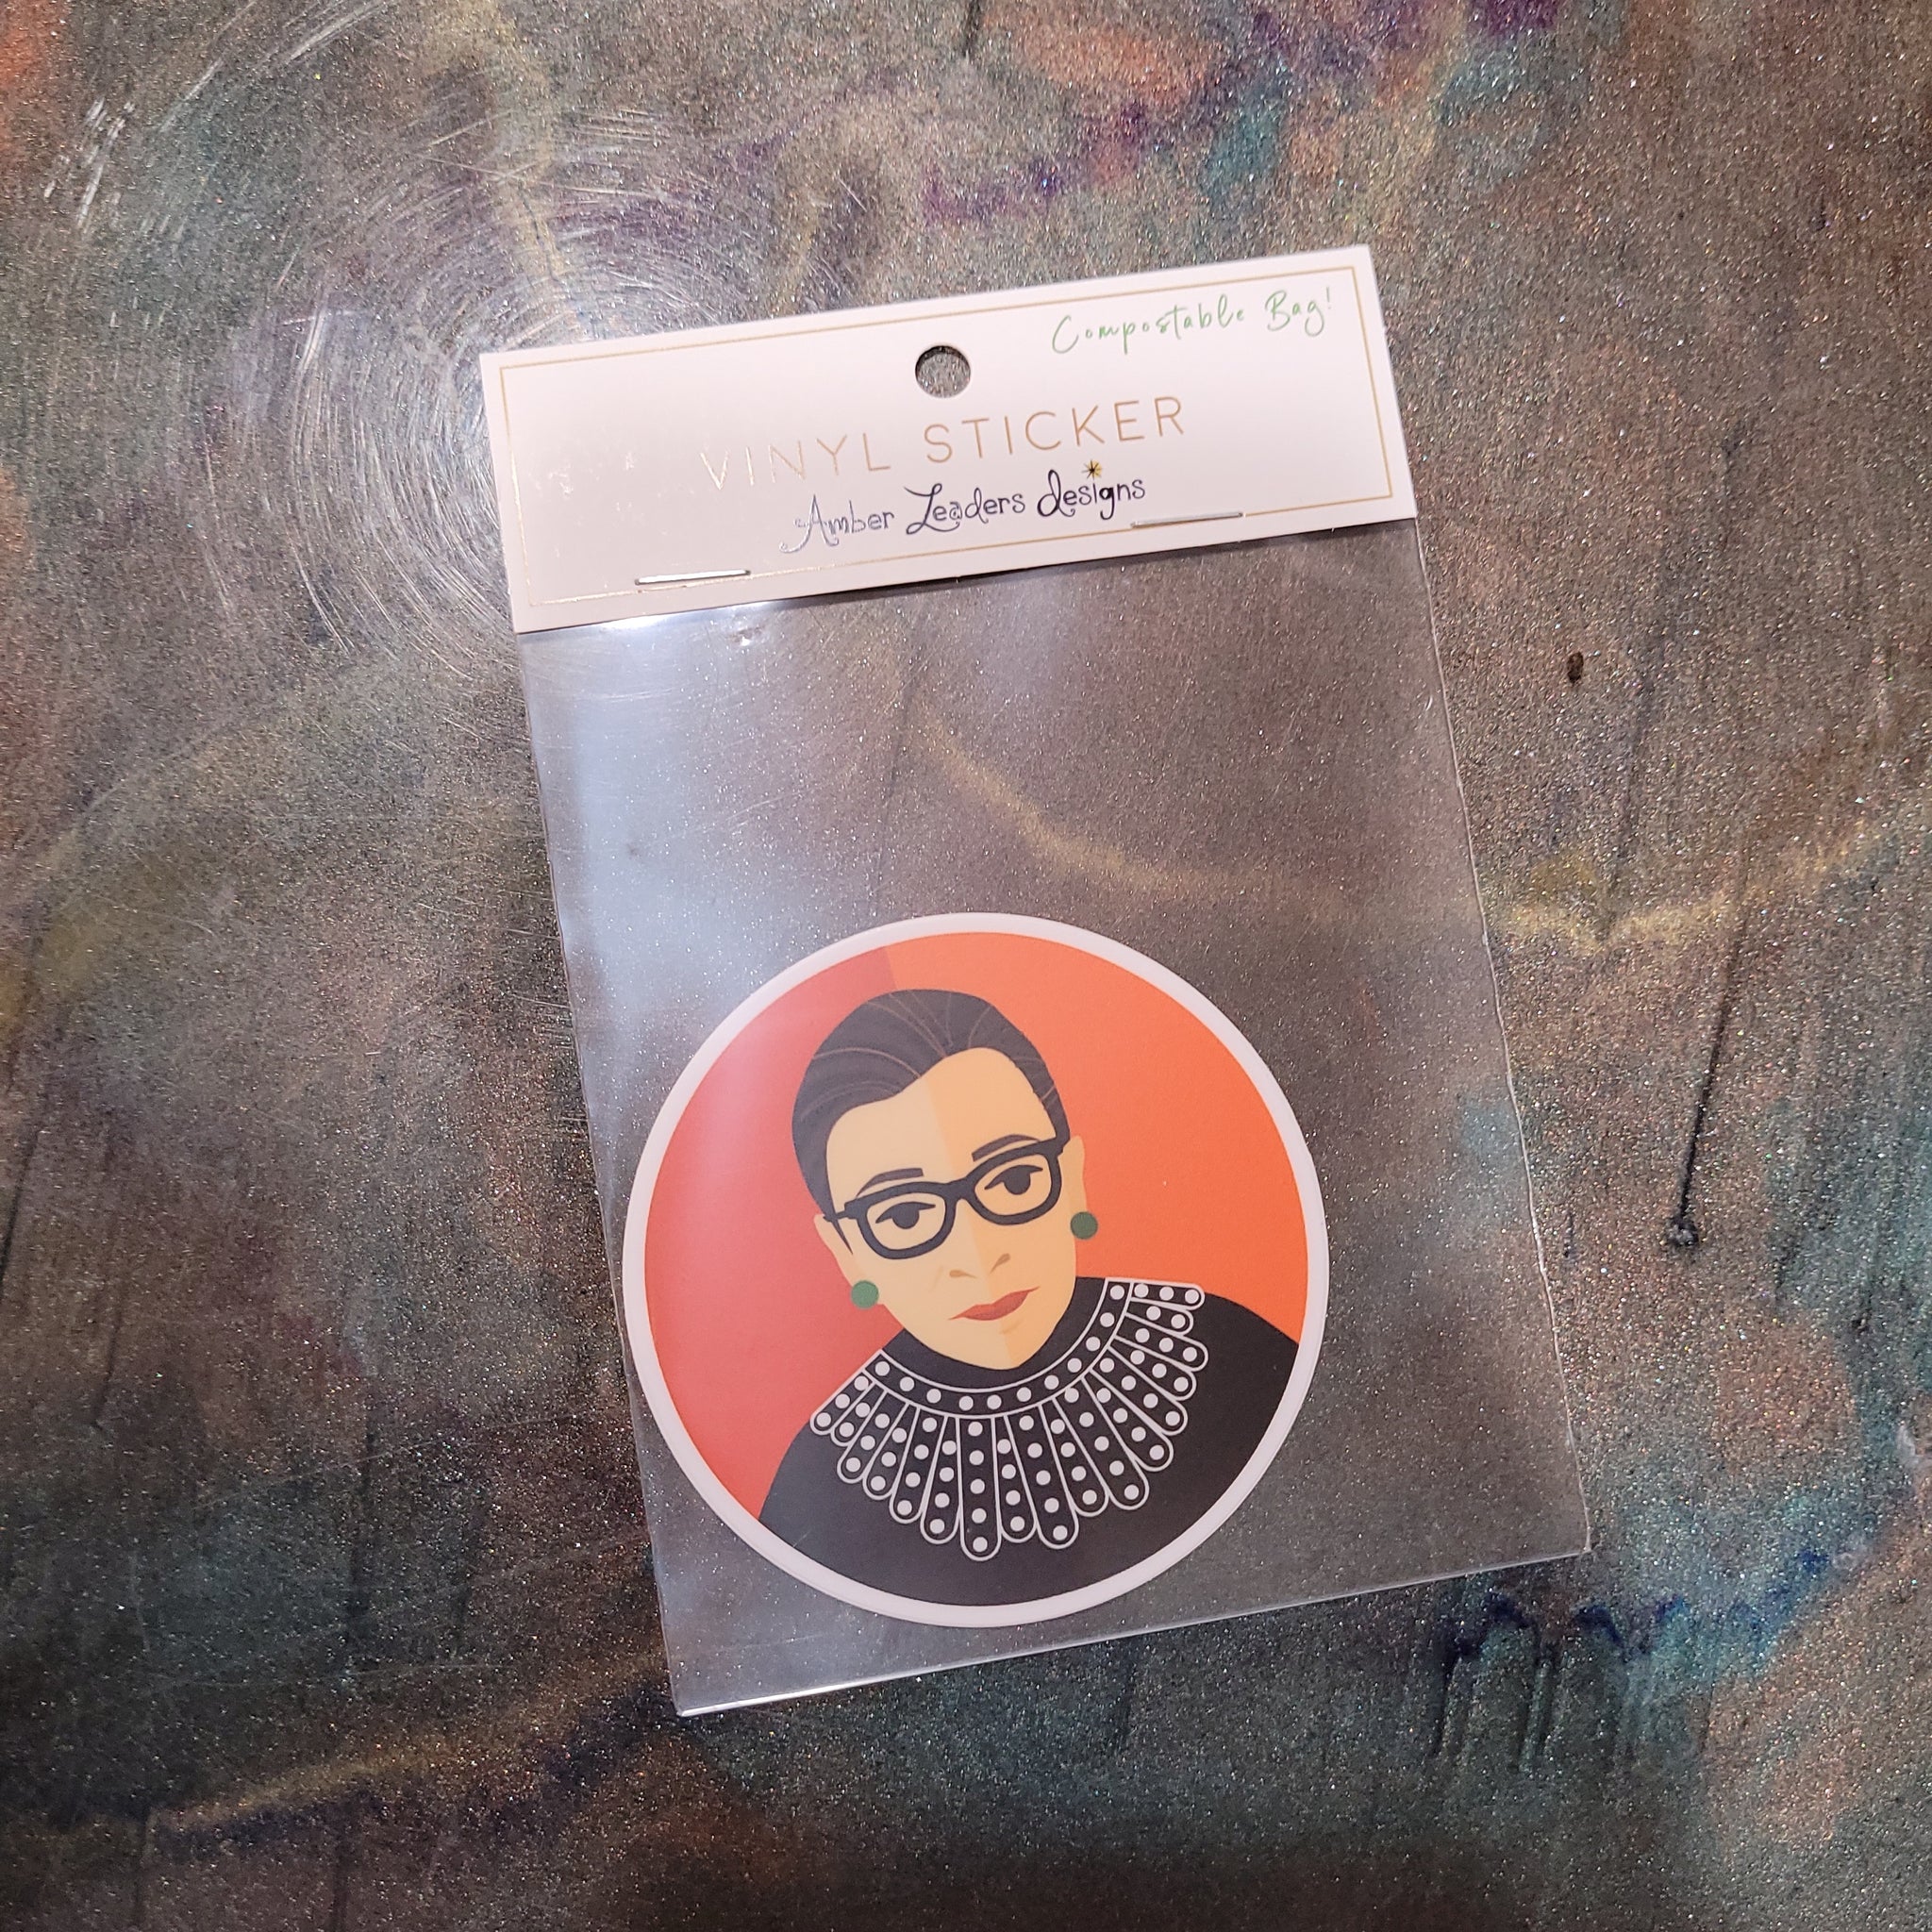 Vinyl Sticker Ruth Bader Ginsburg -Individually Packaged in a Compostable Bag